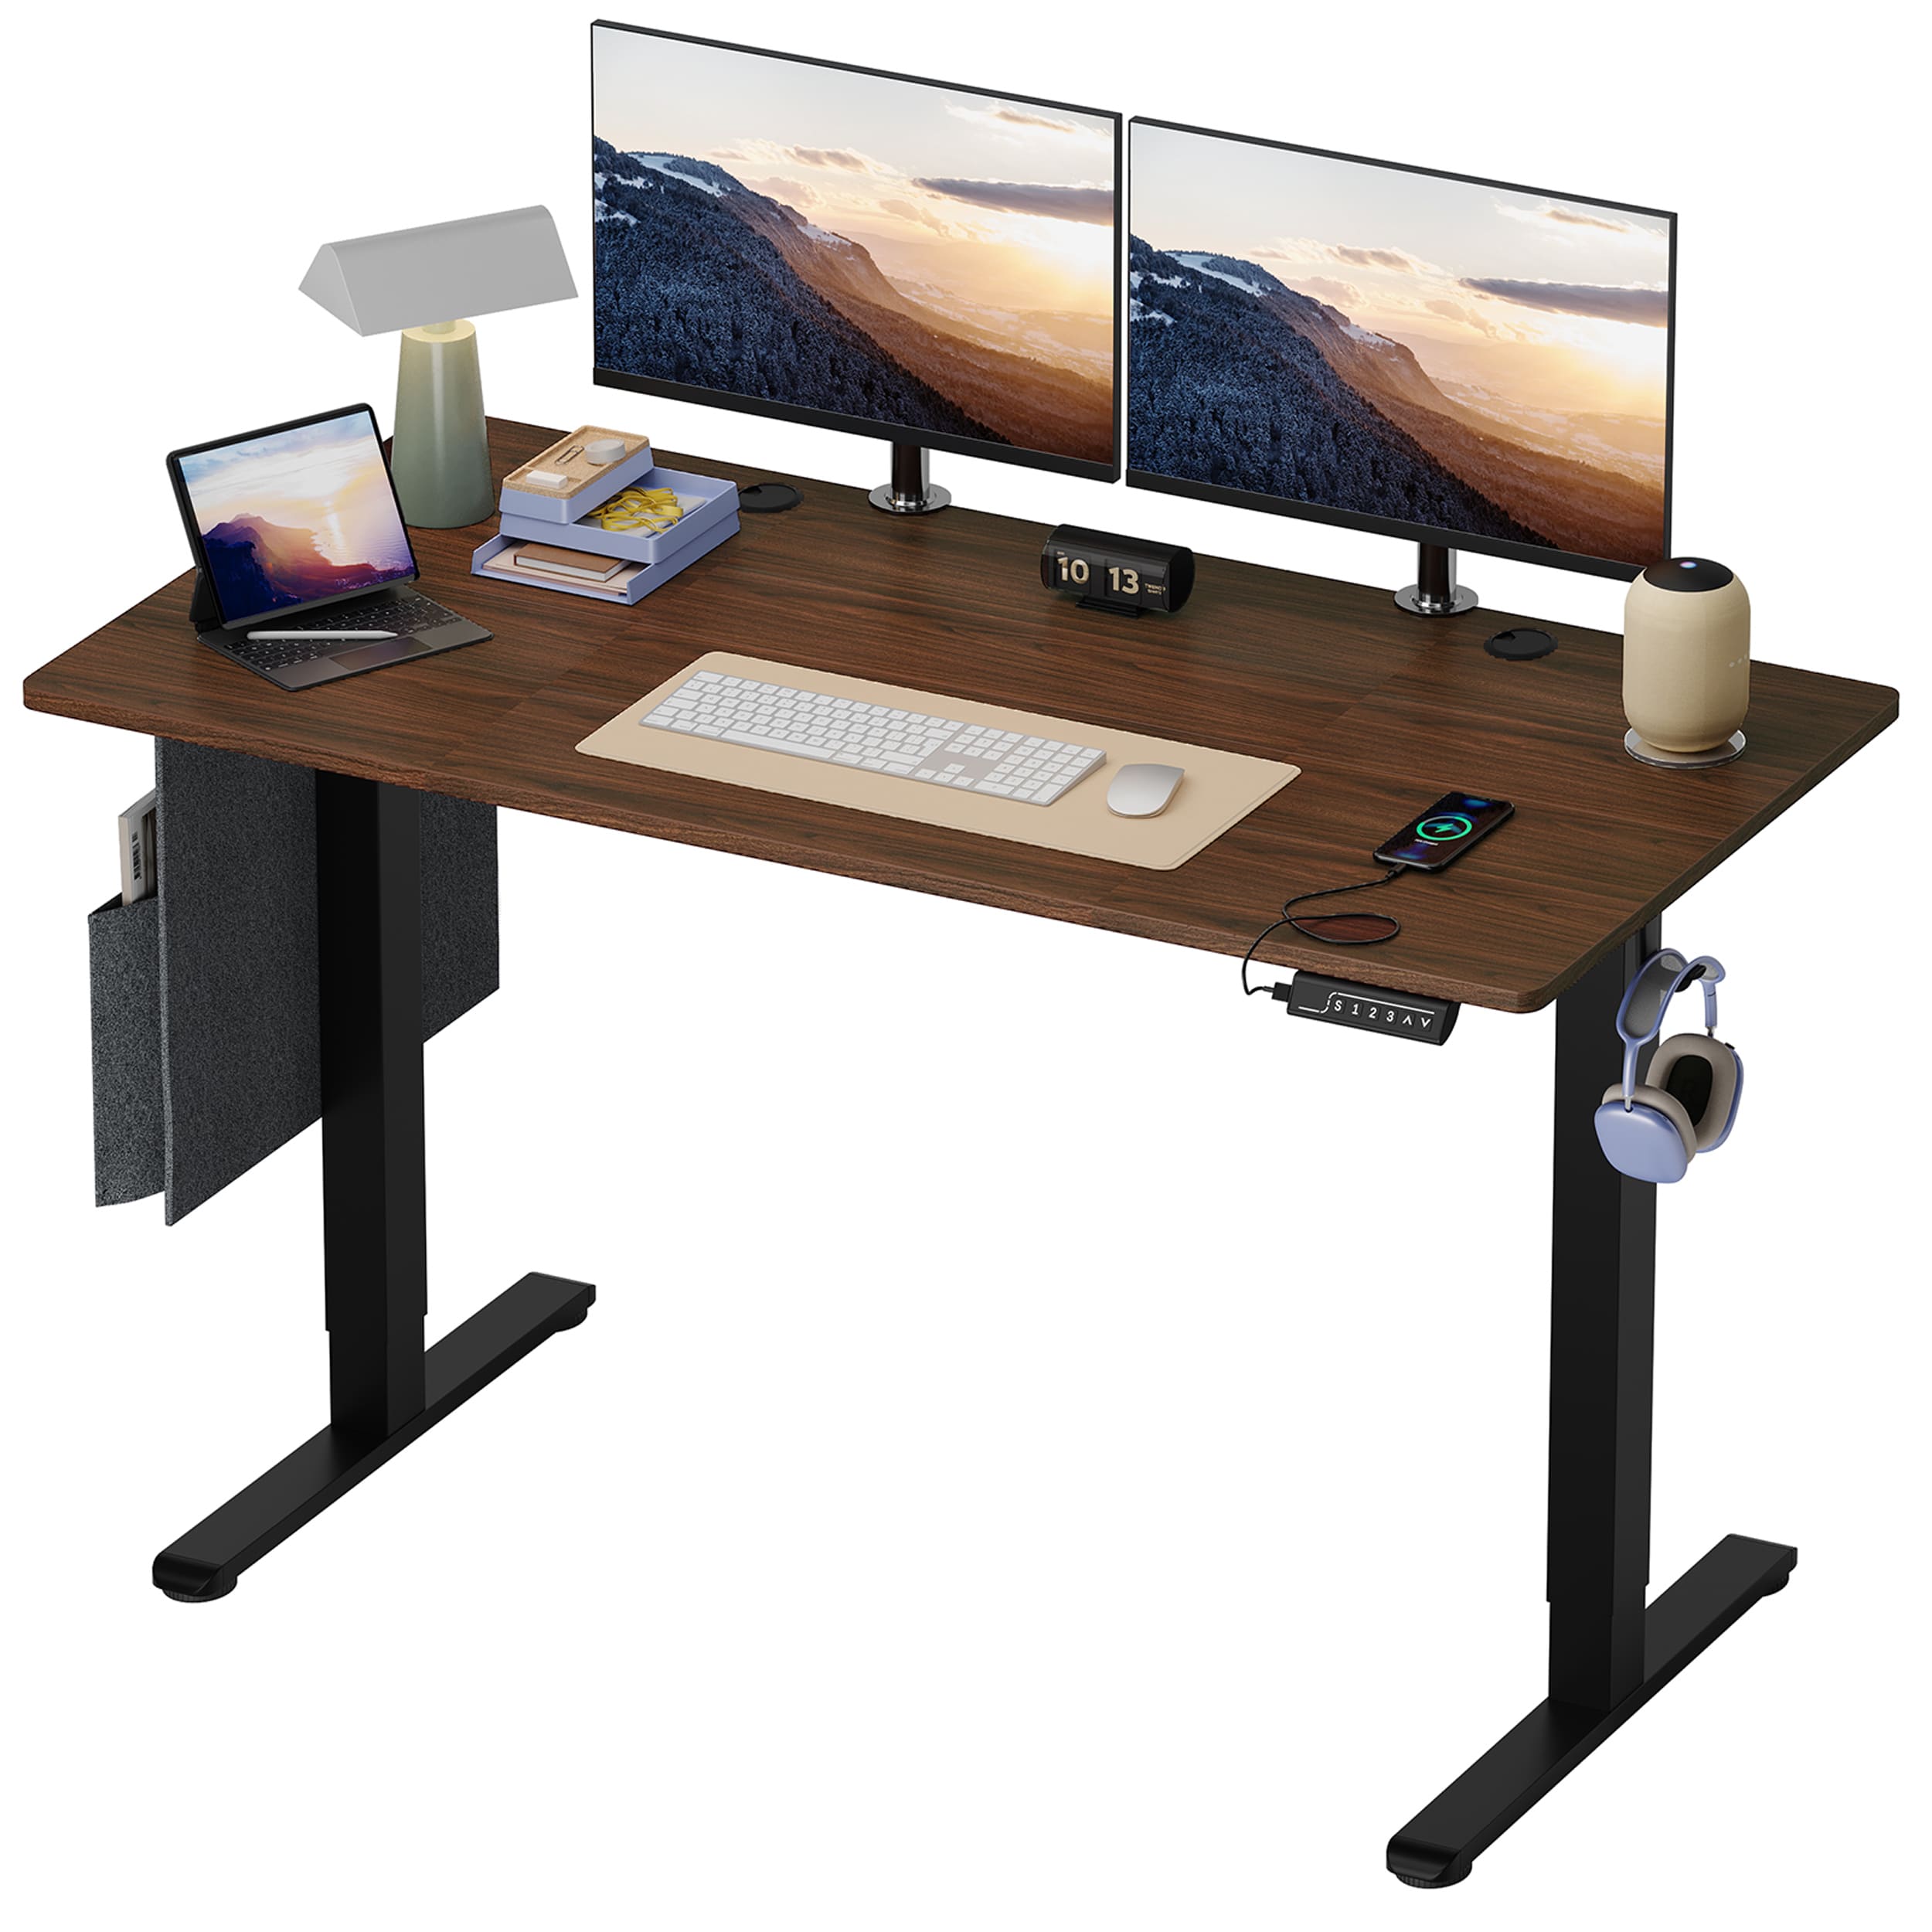 55 inch black standing desk with USB charging port